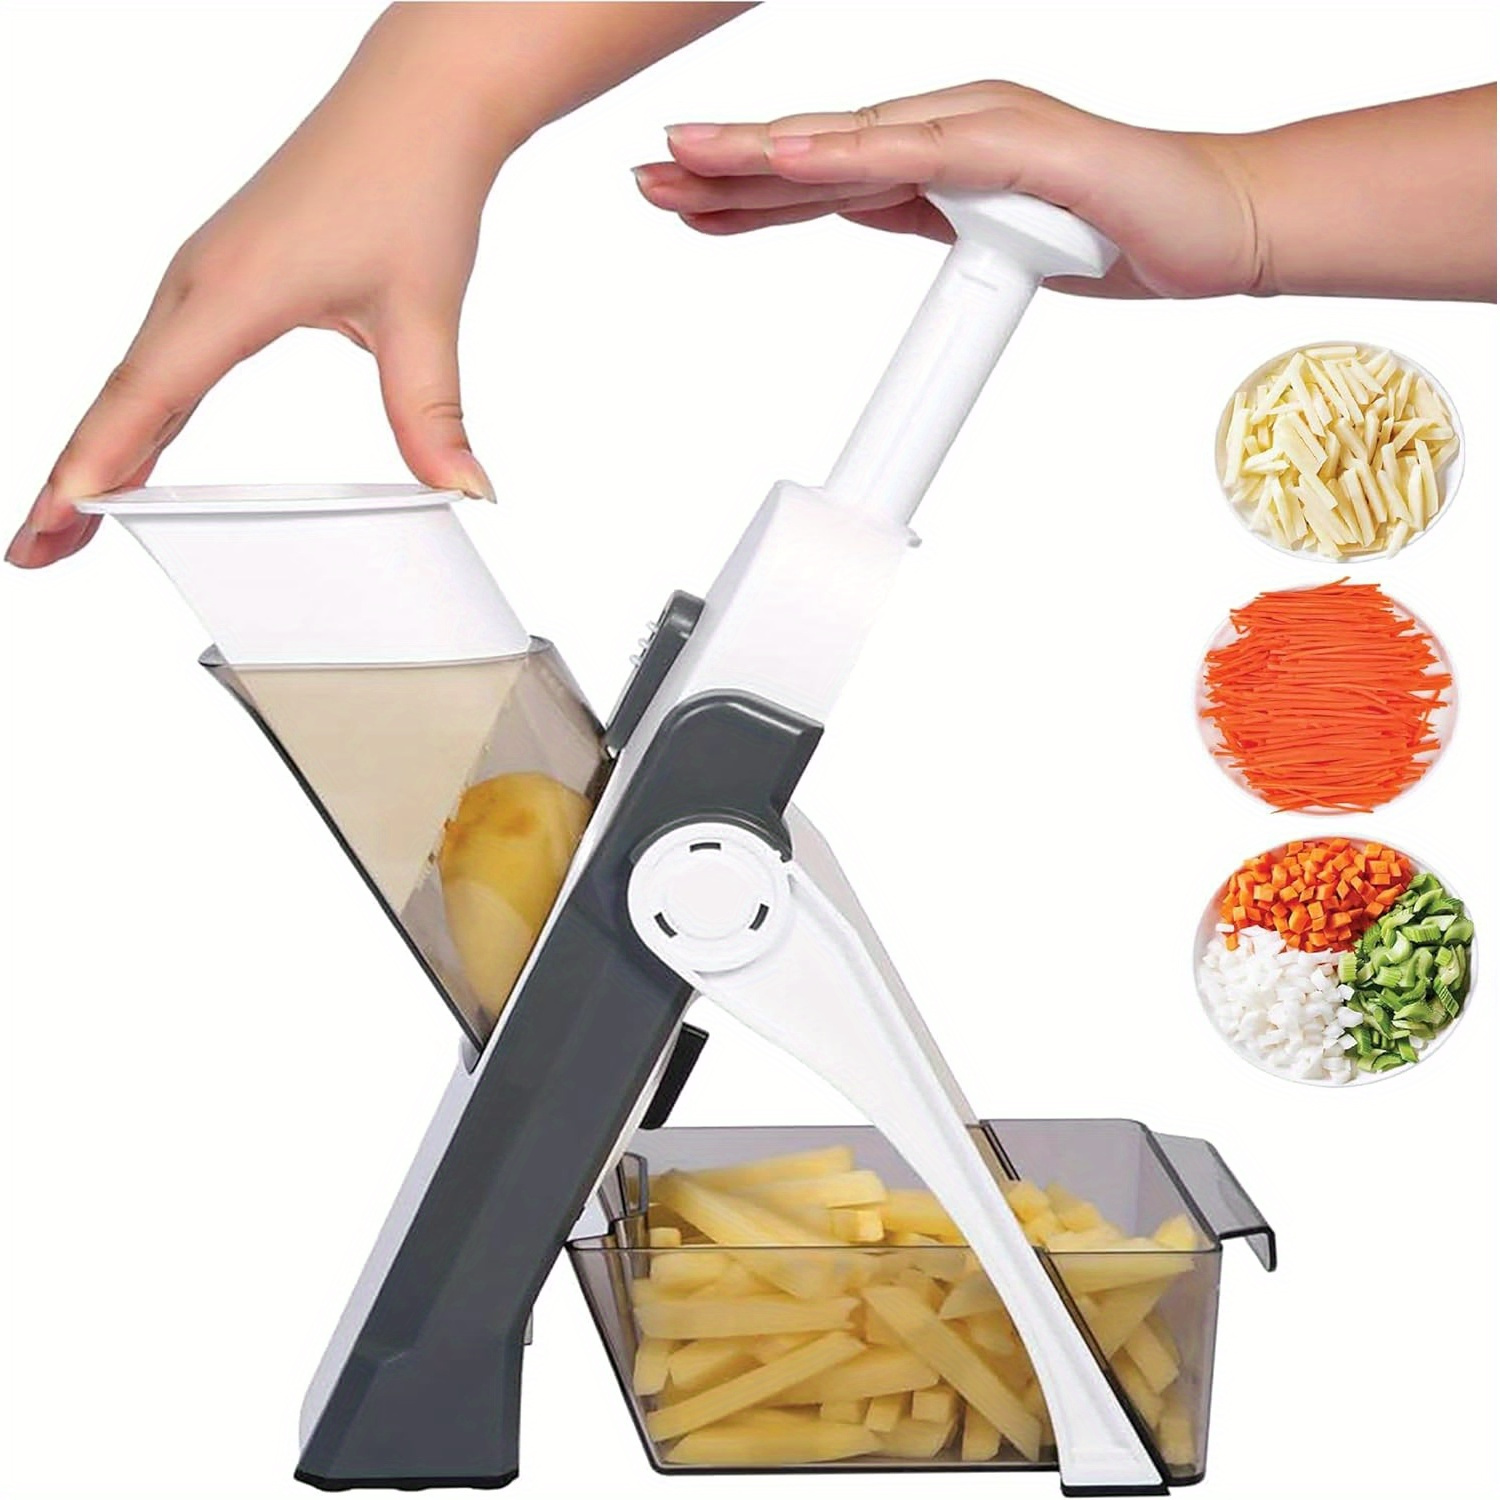 

Safety Mandoline Slicer With 7 Blades, Mandoline Food Chopper Vegetable Cutter For Potatoes, Cheese, Apples, Carrots, Onion, Garlic, And More (gray)